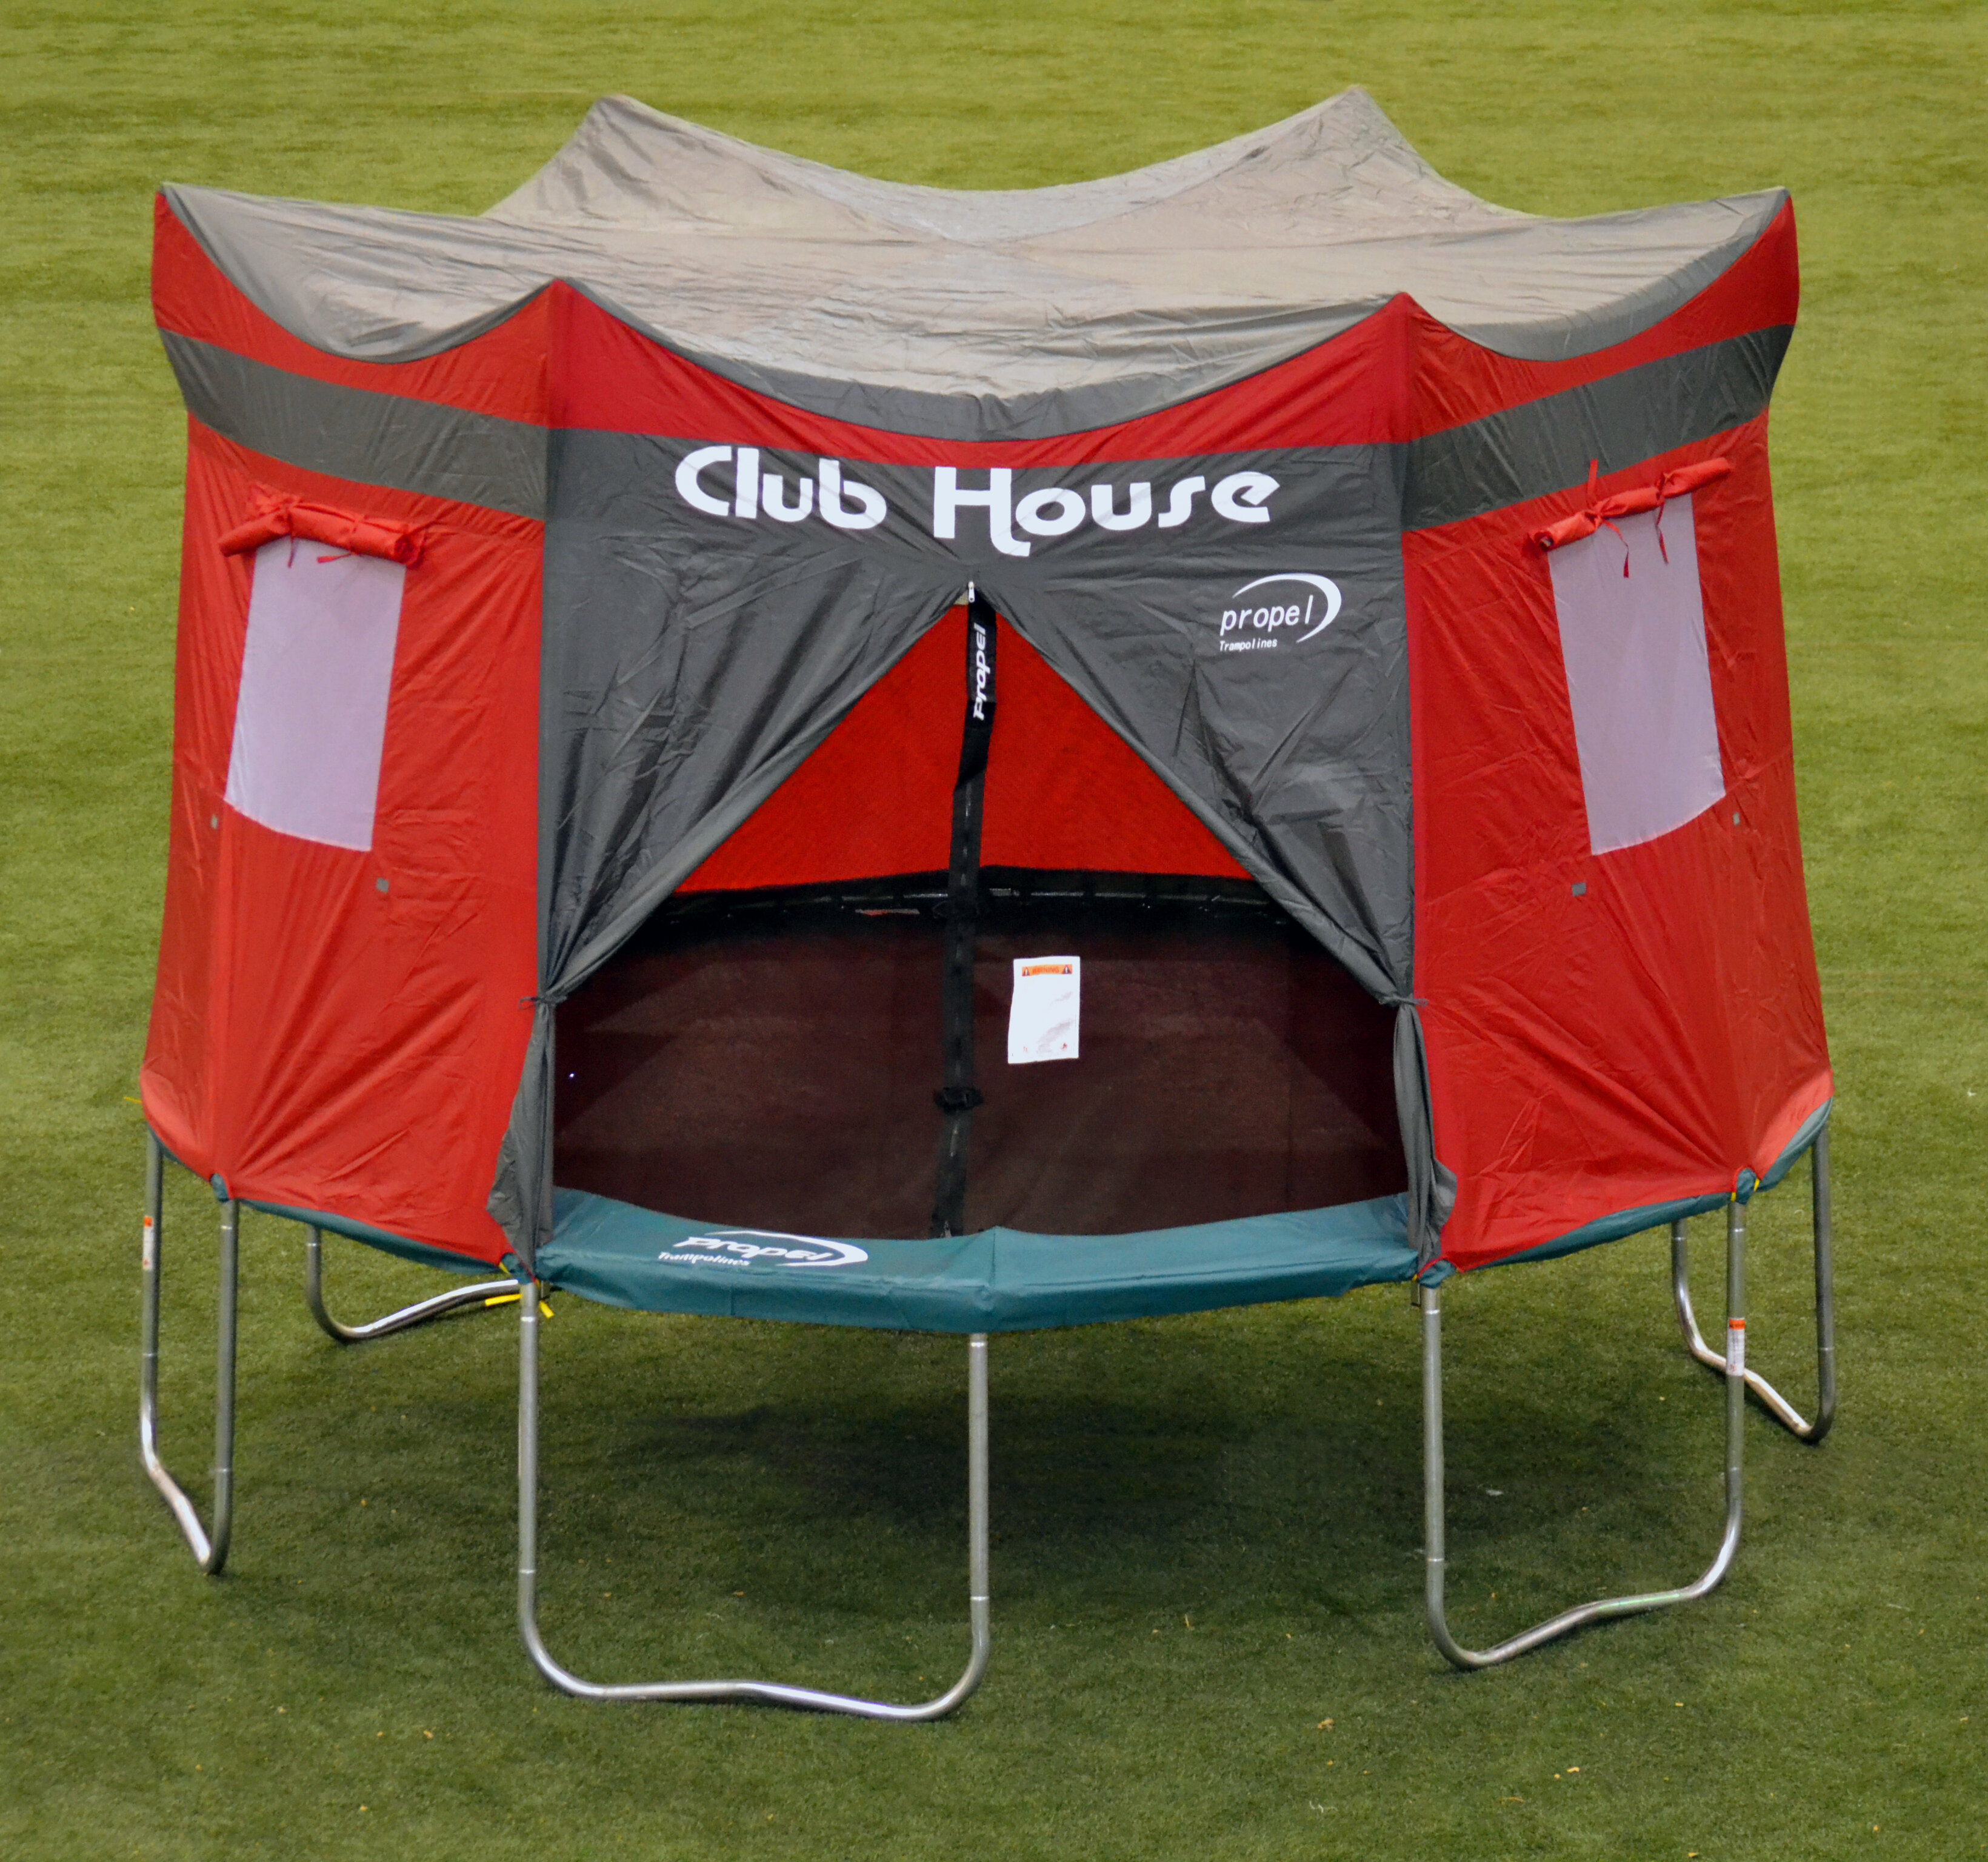 Trampolines 14' Red Clubhouse Trampoline Reviews | Wayfair